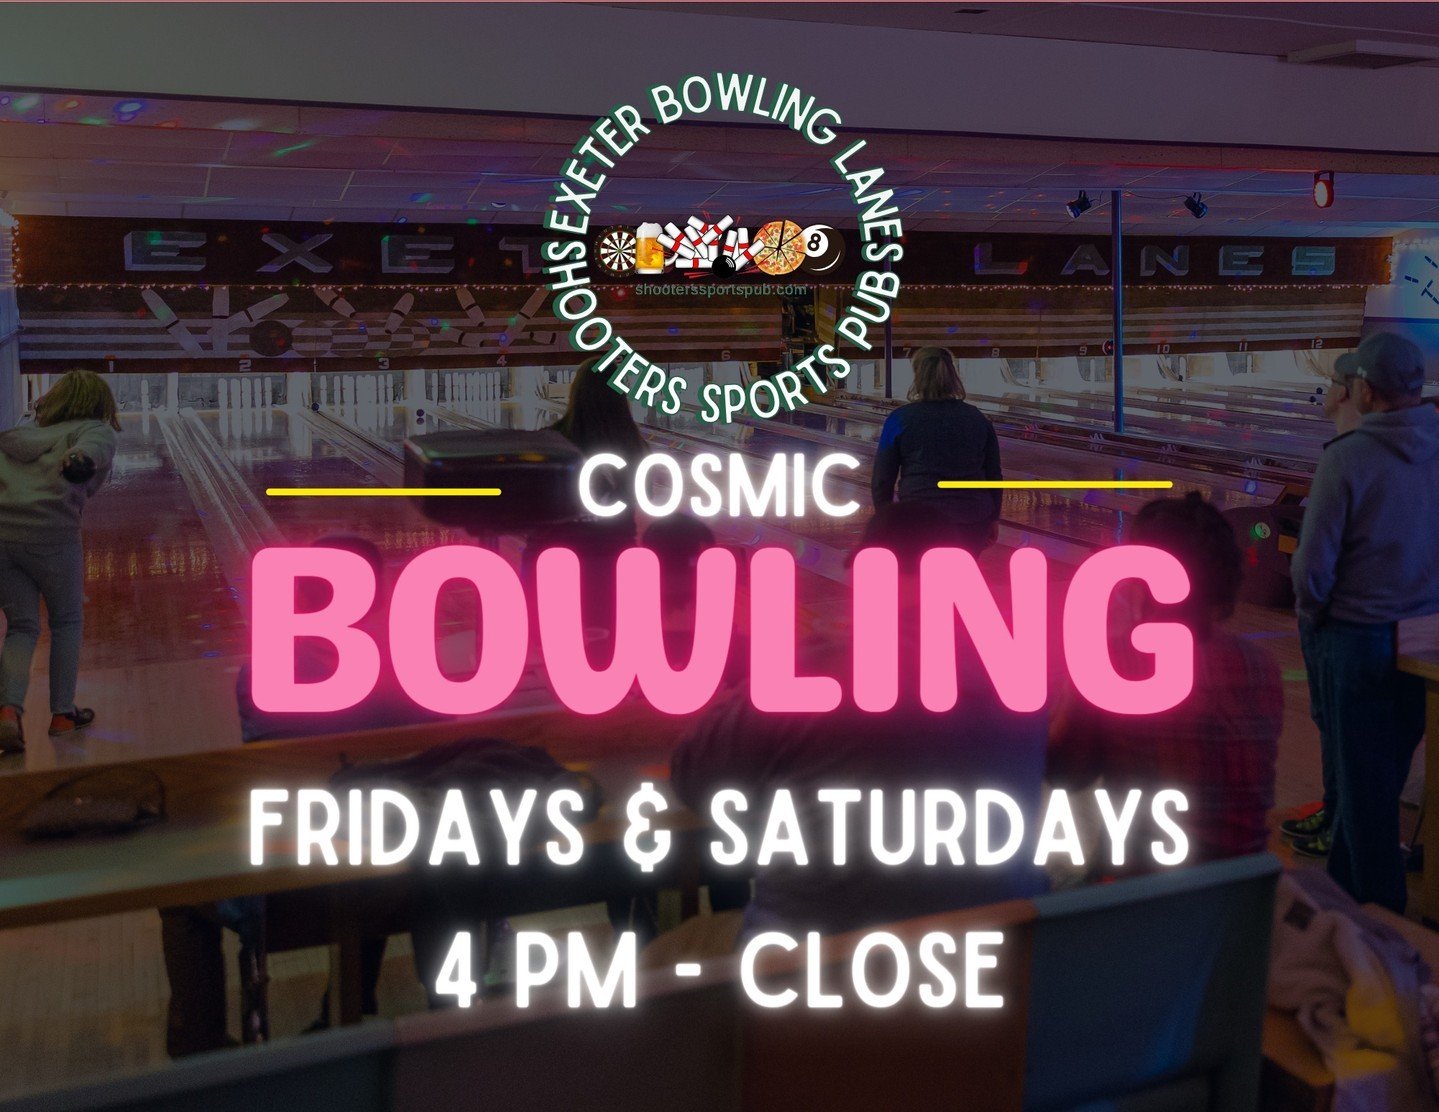 ✨🎳 Get ready for a striking Friday night! Cosmic Glow Candlepin Bowling lights up your weekend from 4 pm 'til we close. Let's glow crazy! 🌟 ⁠
⁠
#CosmicBowling #GlowAndBowl⁠